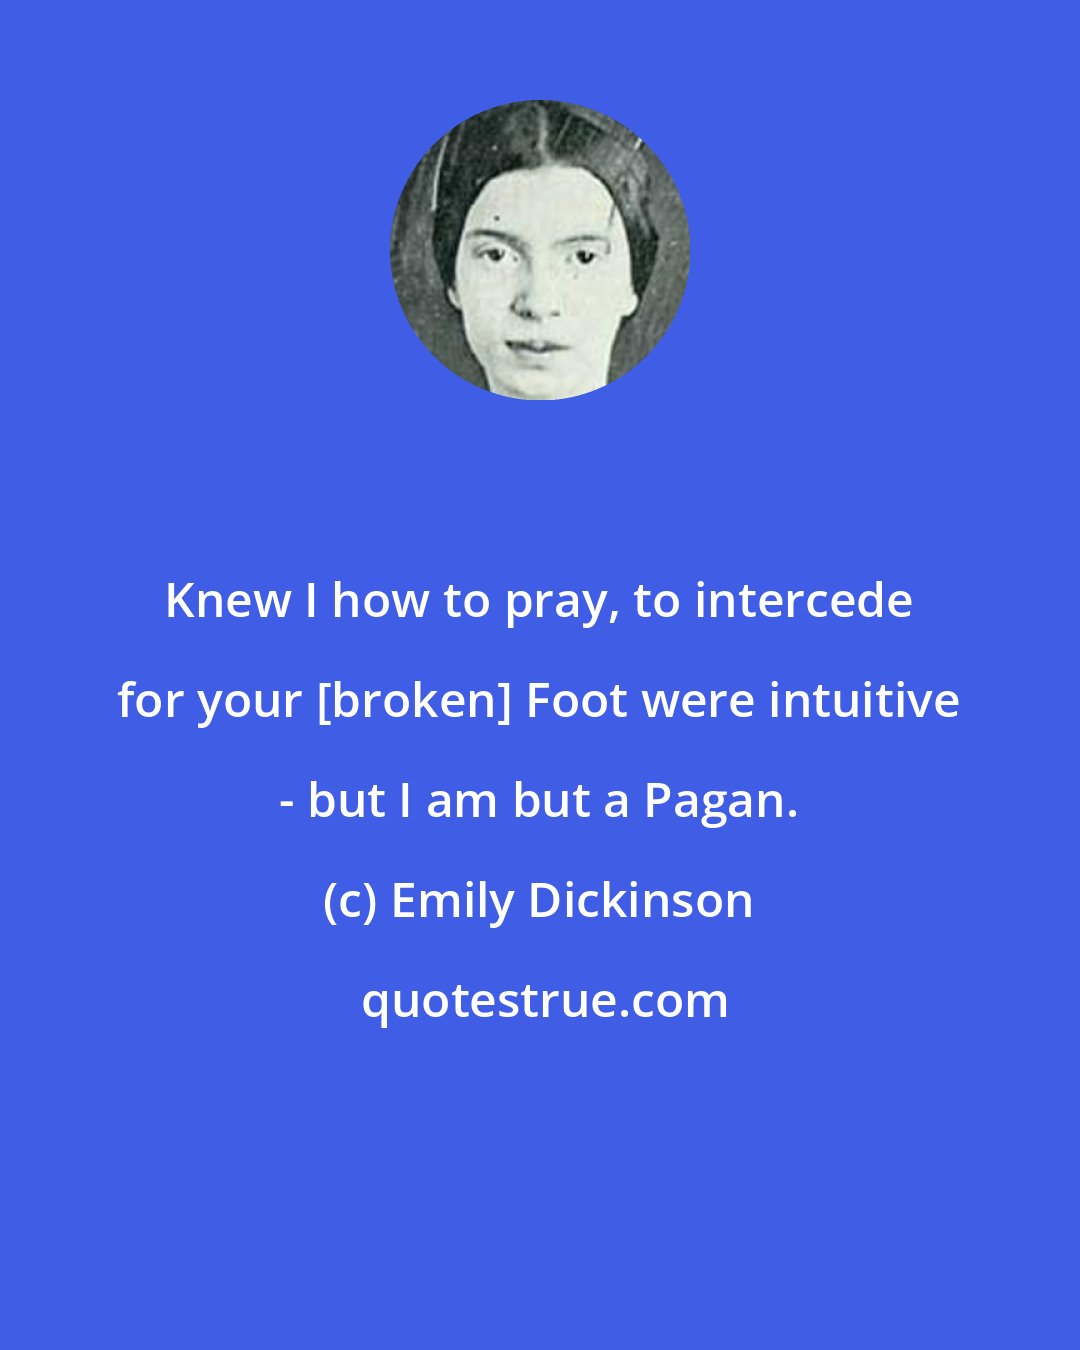 Emily Dickinson: Knew I how to pray, to intercede for your [broken] Foot were intuitive - but I am but a Pagan.